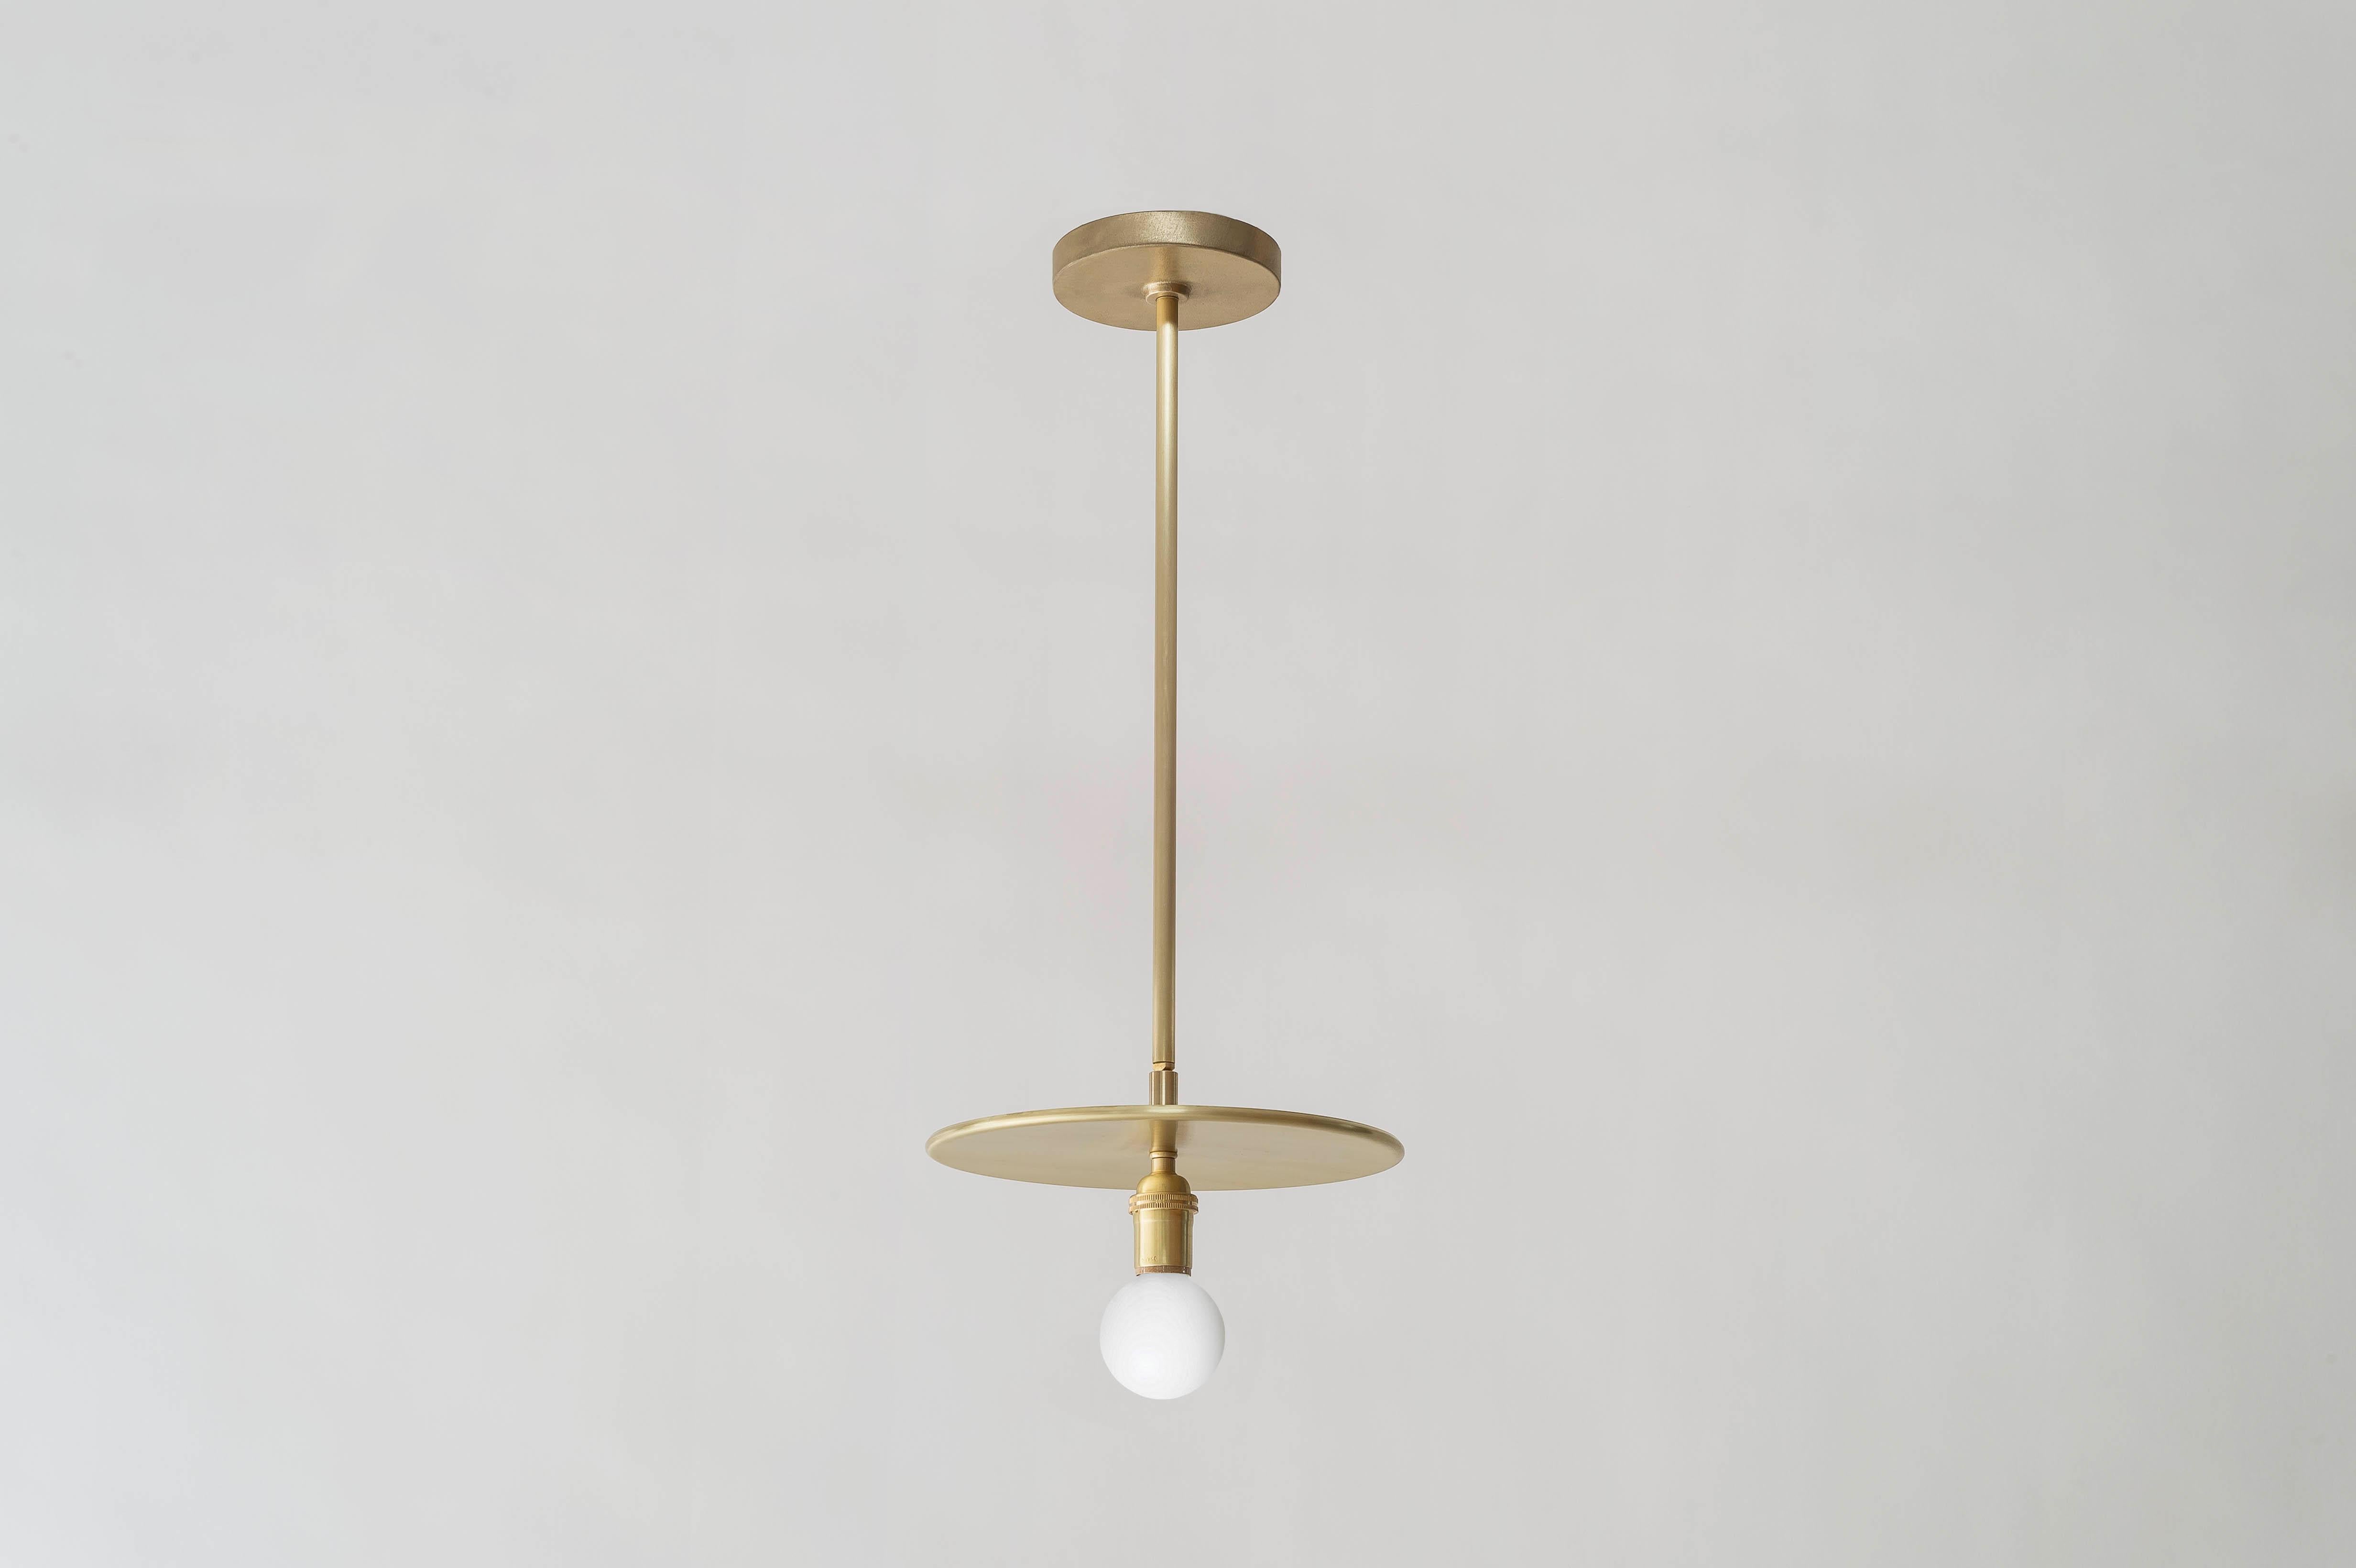 This elemental pendant comes in a hewn brass finish. A pivot joint allows for 90 degrees of rotation. The dimension of the rod can be customized at three standard lengths (24